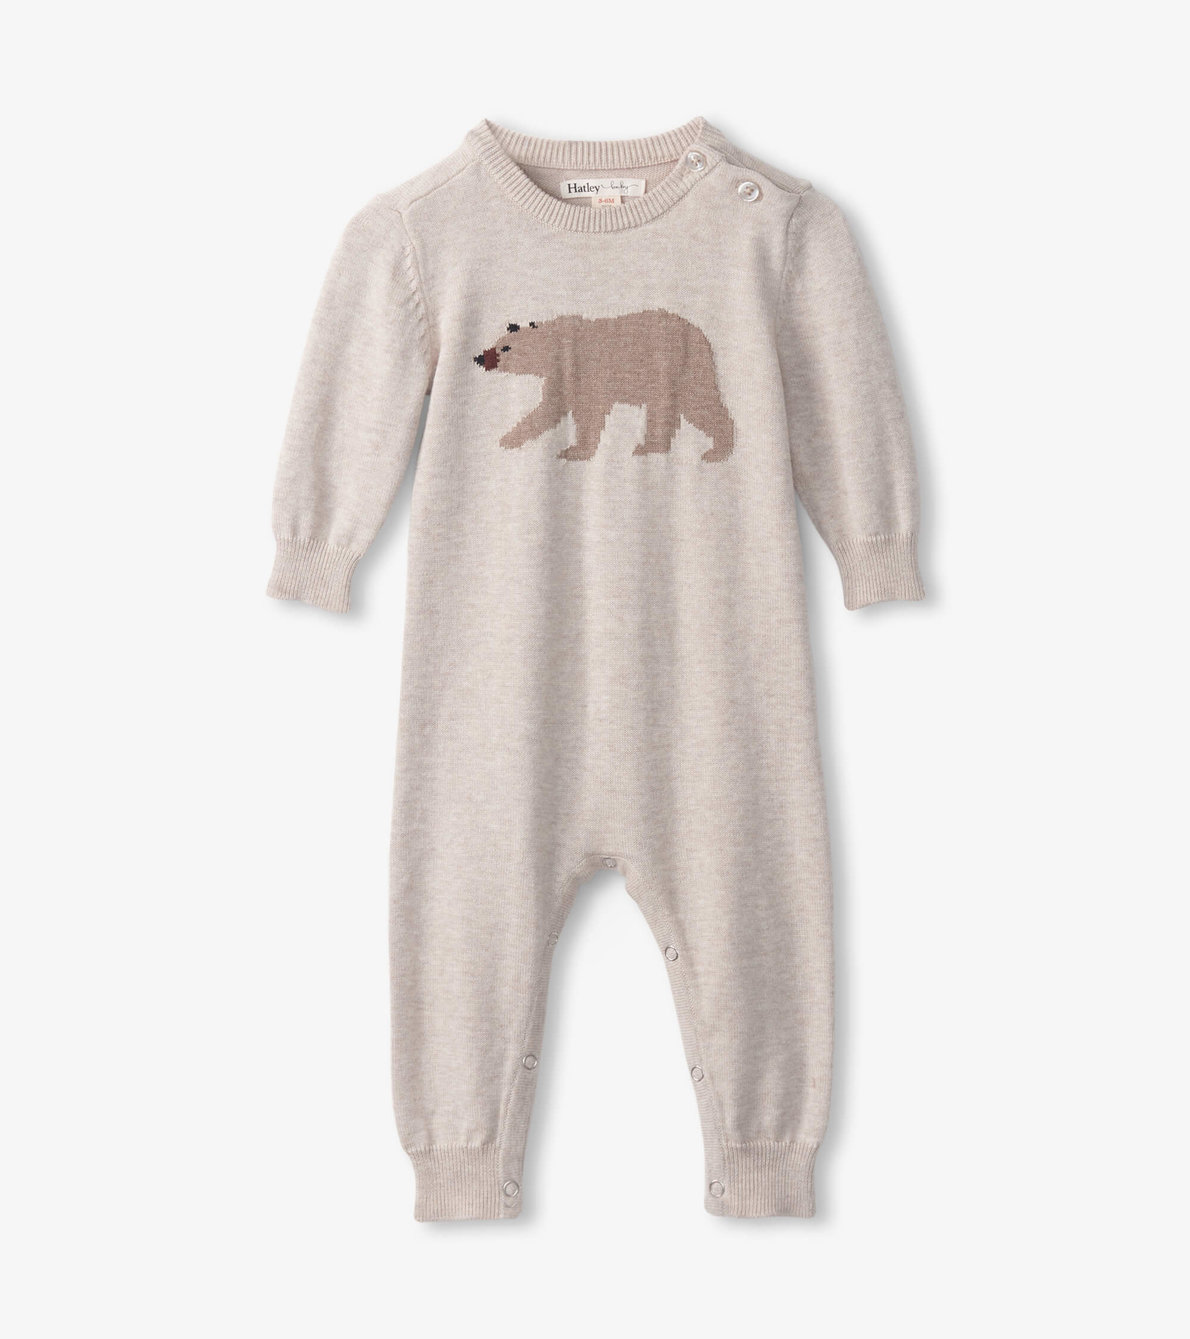 View larger image of Baby Bear Cub Sweater Onesie